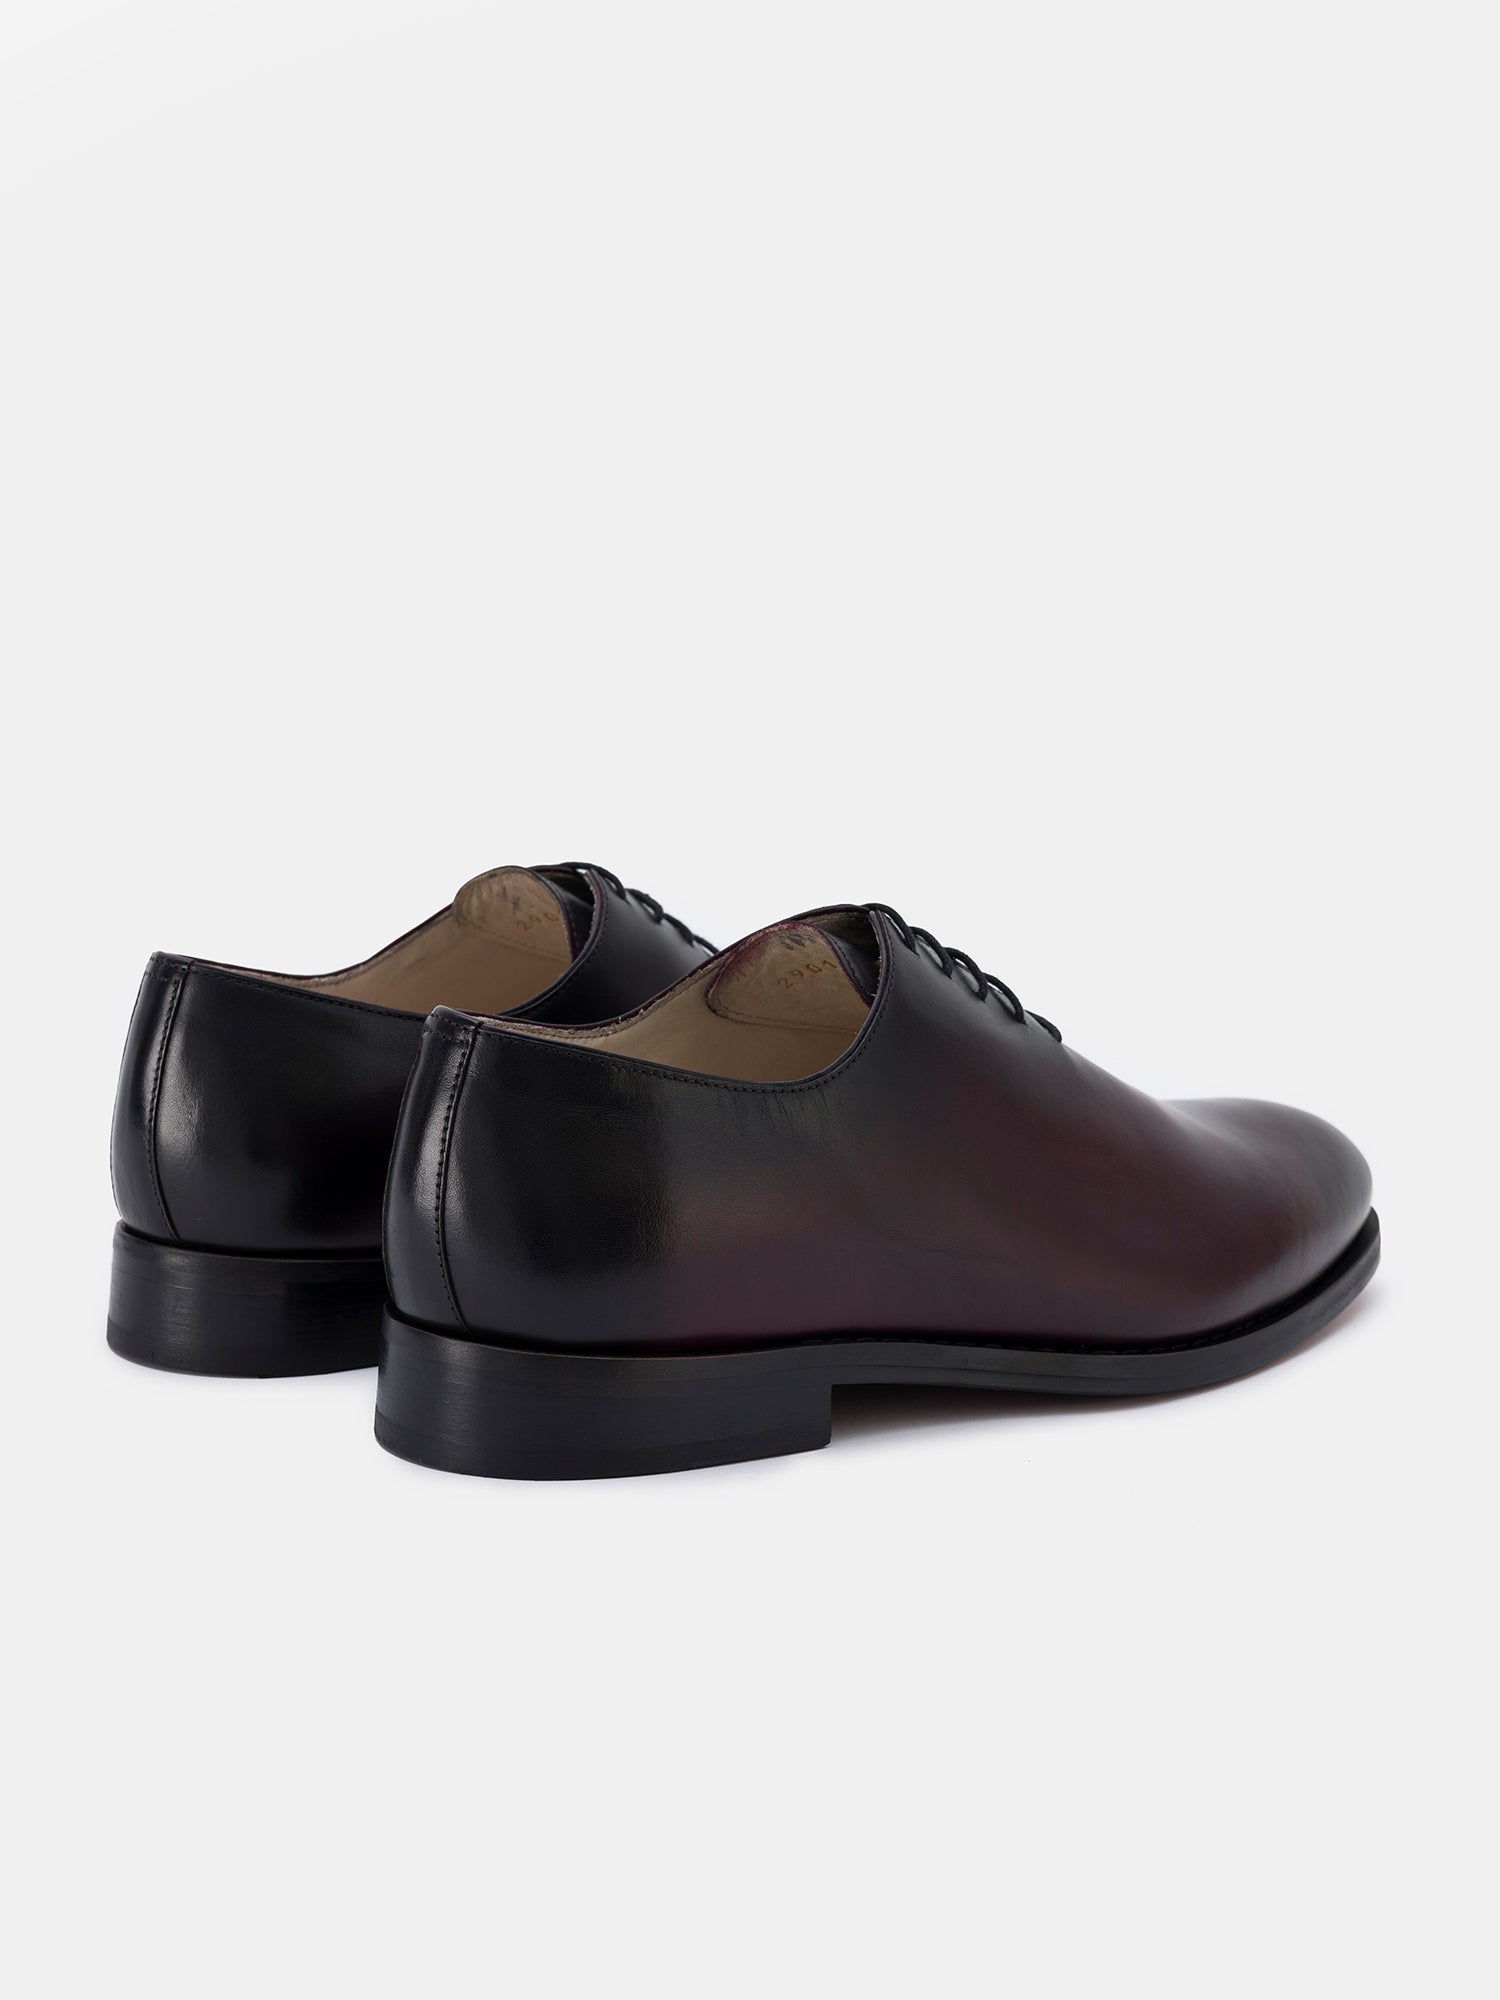 Bordeaux Burnished Leather Oxford